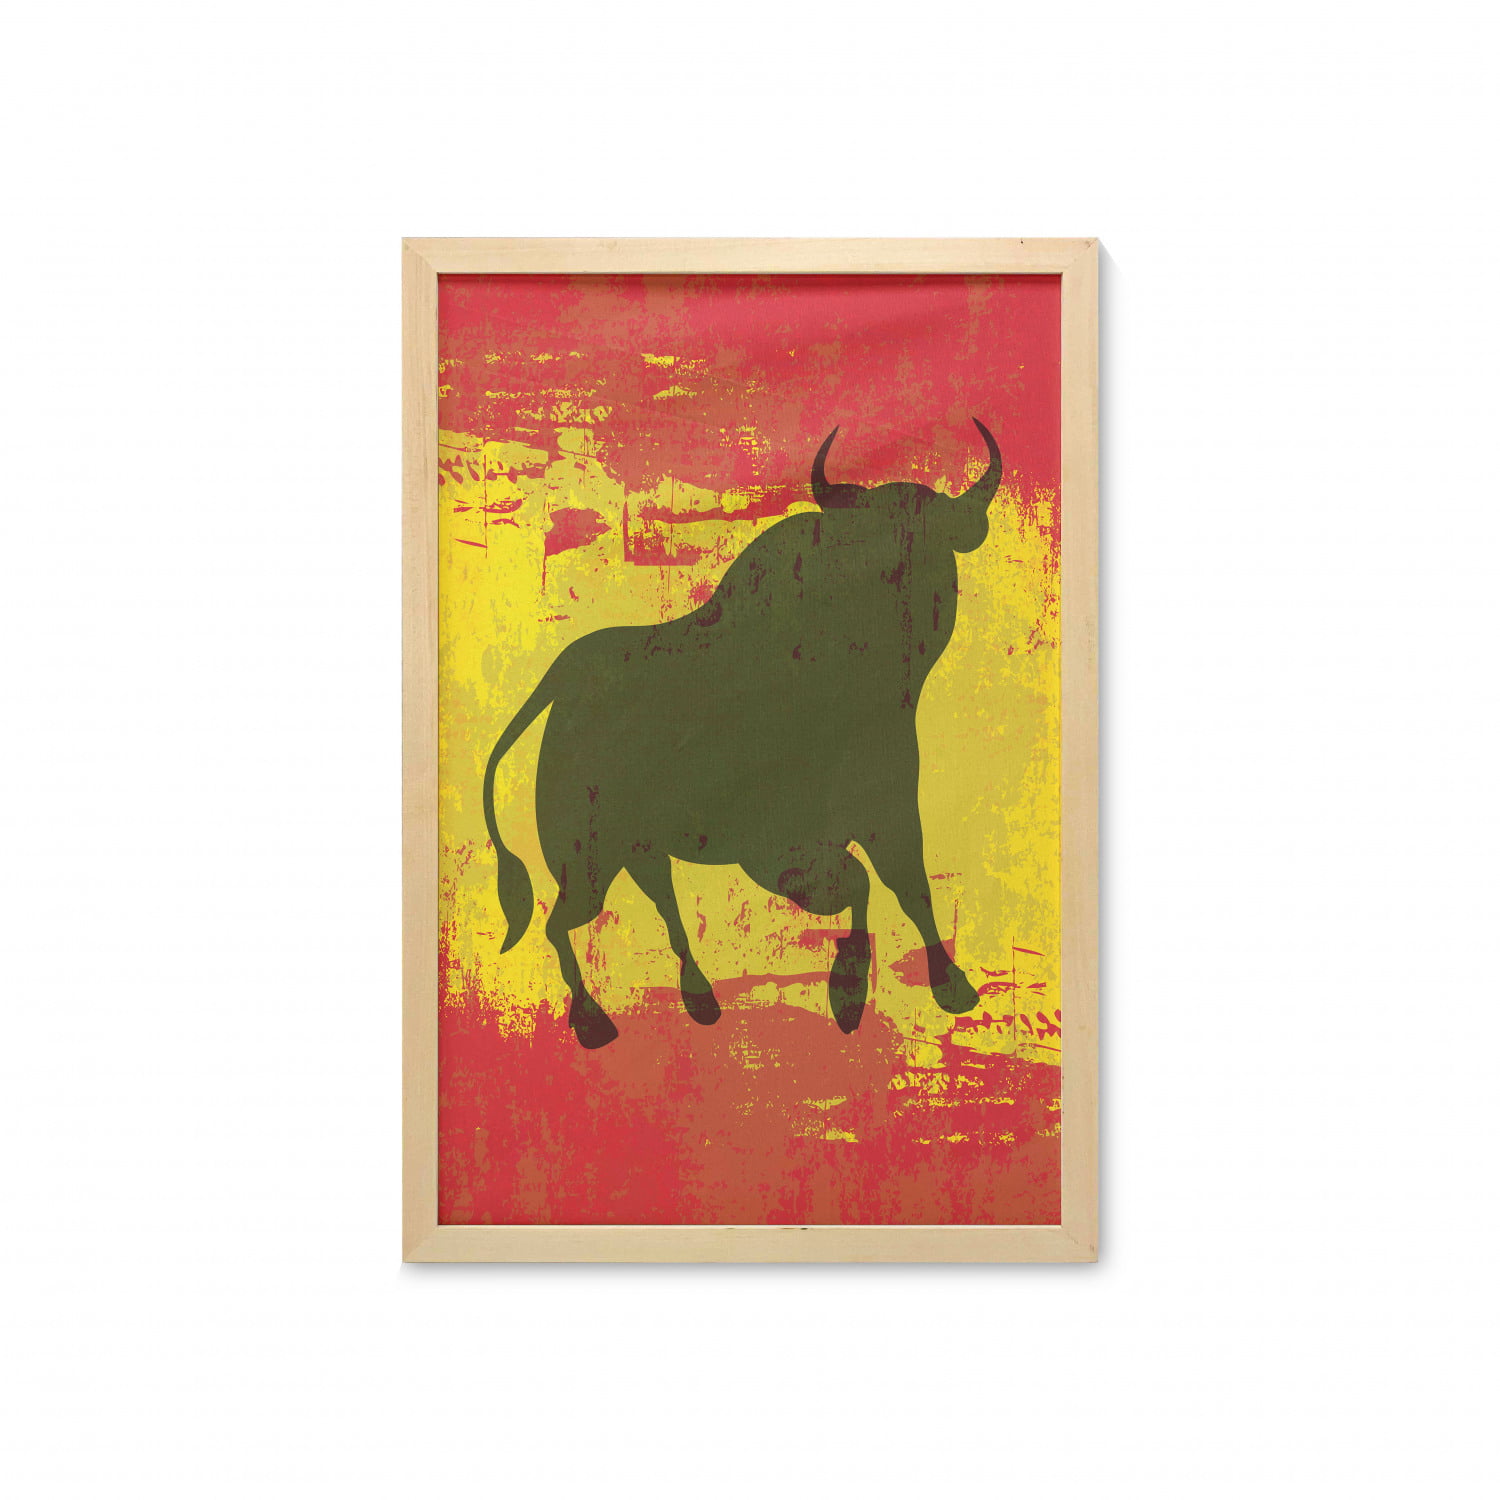 Spanish Wall Art with Frame, Bull Silhouette on Spanish Flag Grunge  National Elements Paint Stains, Printed Fabric Poster for Bathroom Living  Room, 23